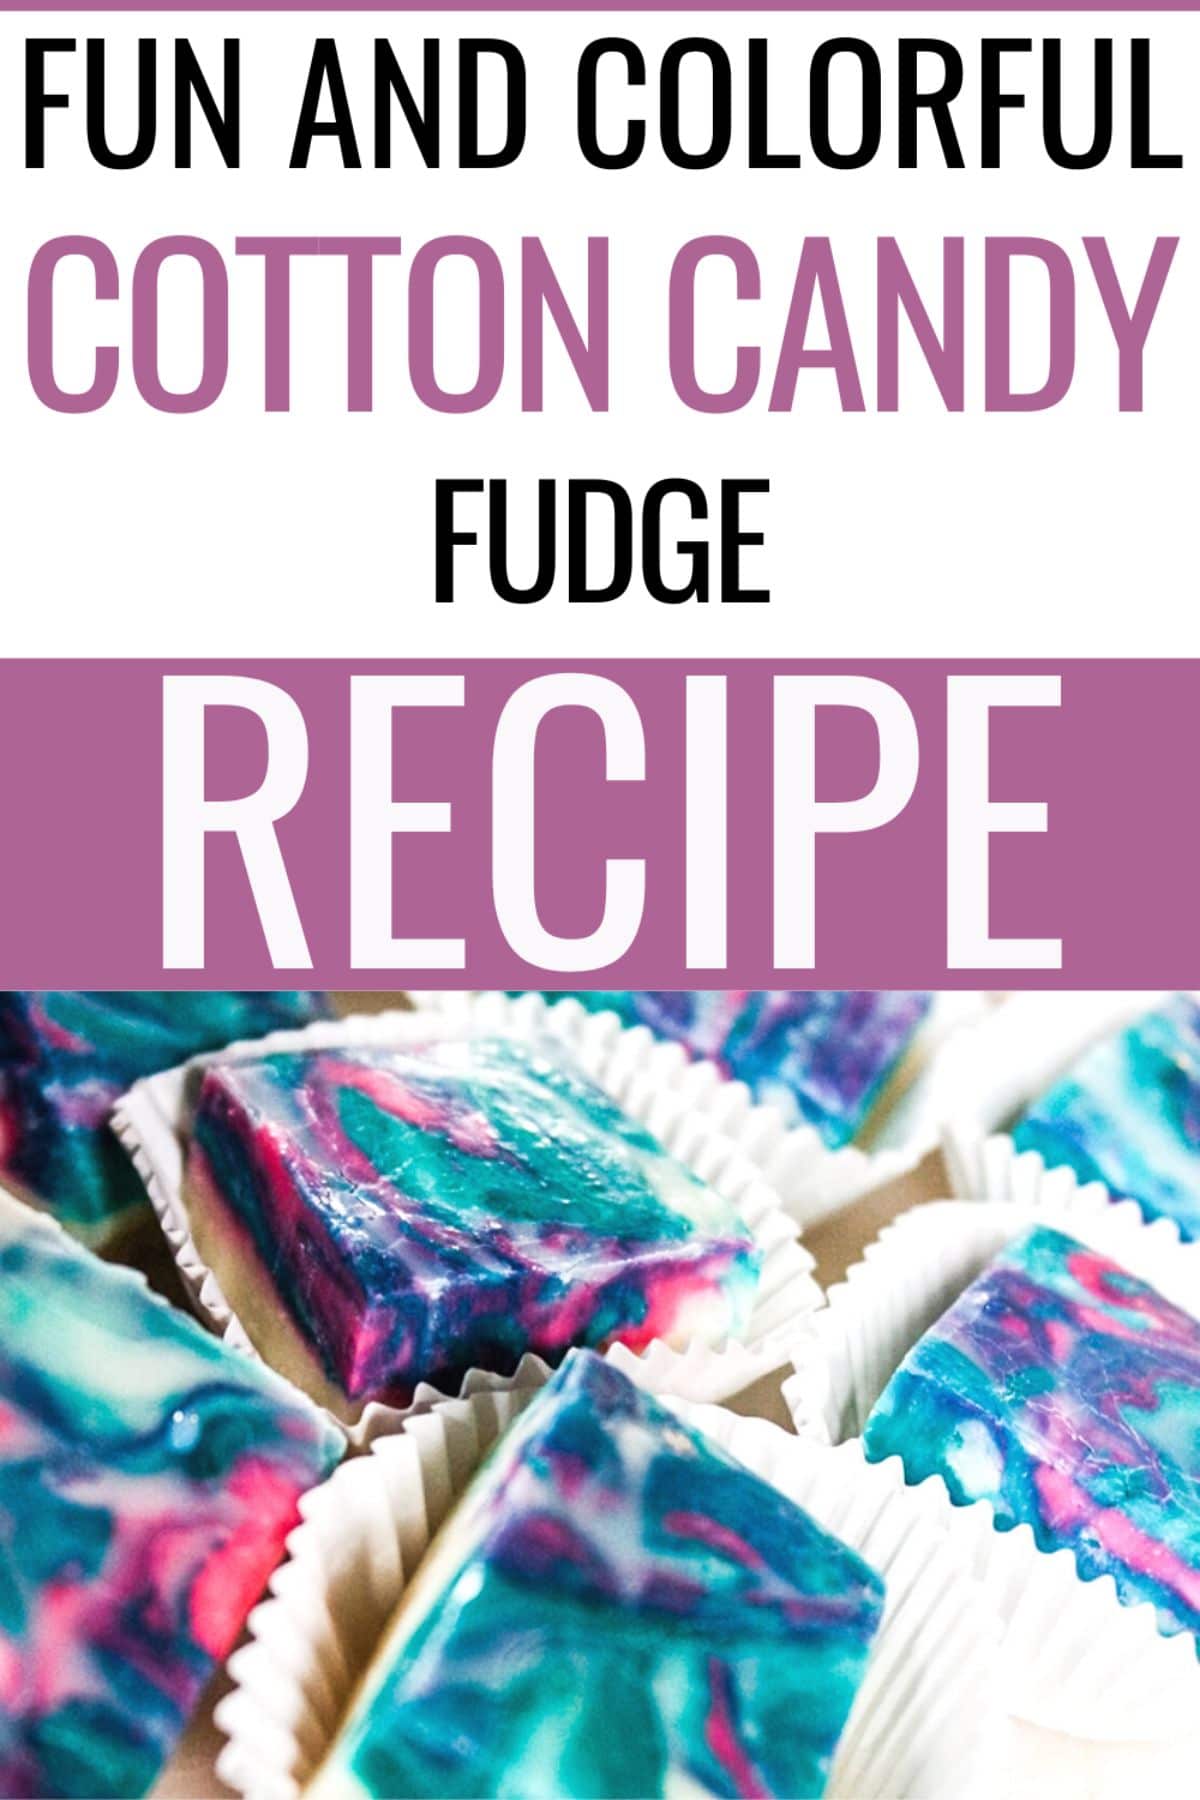 Cotton Candy Fudge in squares in muffin cup wrappers with a text at the upper half of the image saying "Fun and Colorful Cotton Candy Fudge Recipe"